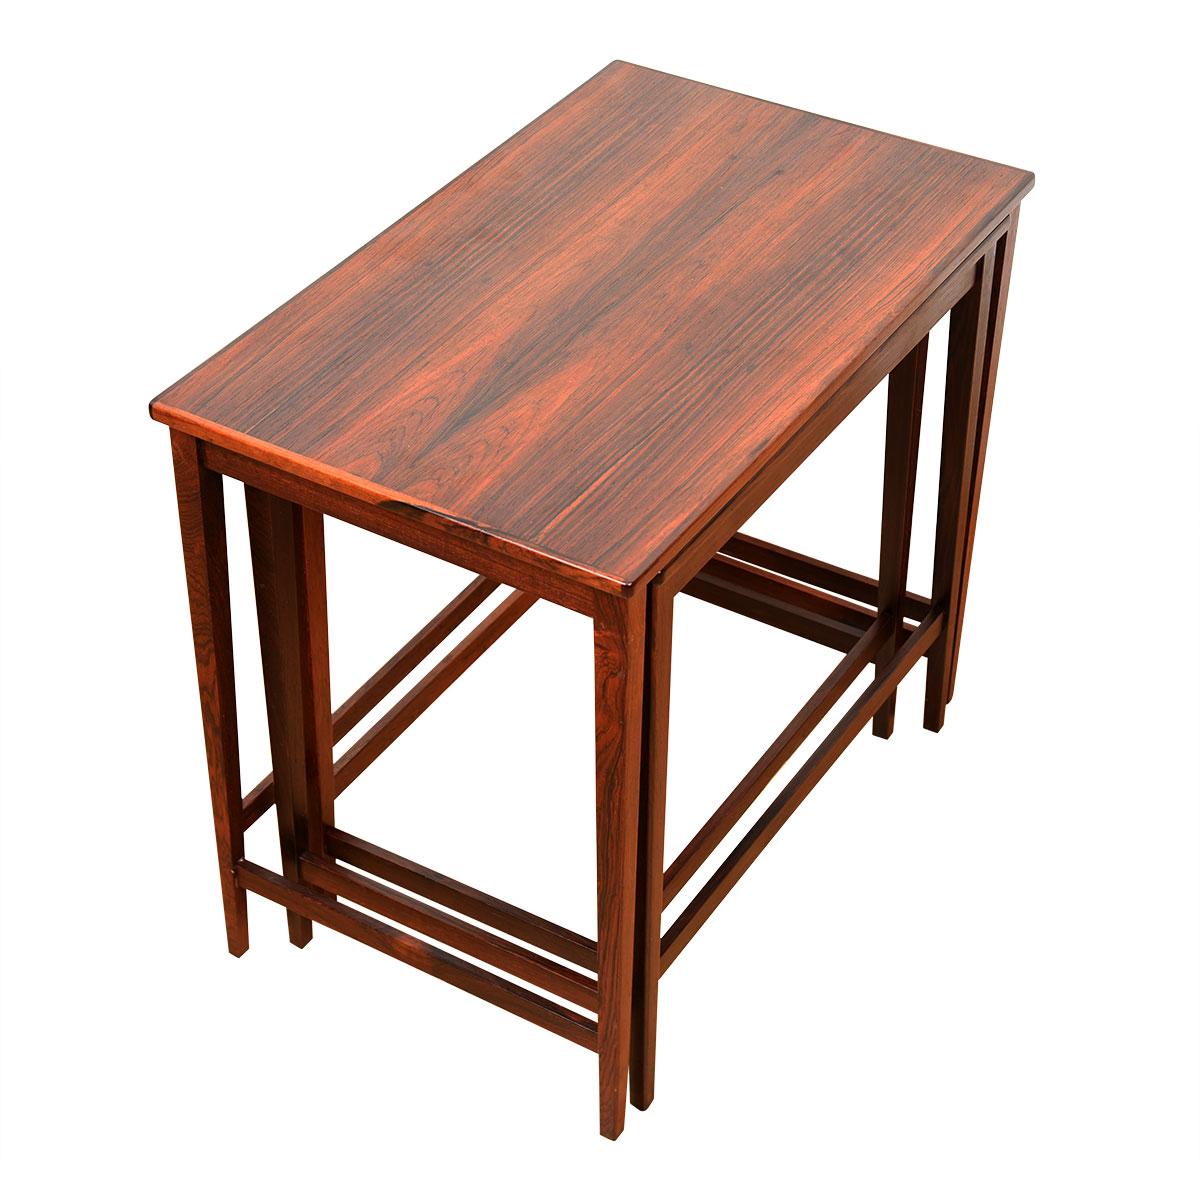 Set of 3 Danish Modern Rosewood Nesting Tables

Additional information:
Material: Rosewood
Featured at DC

Dimension: W 22 x D 14 x H 19.5.